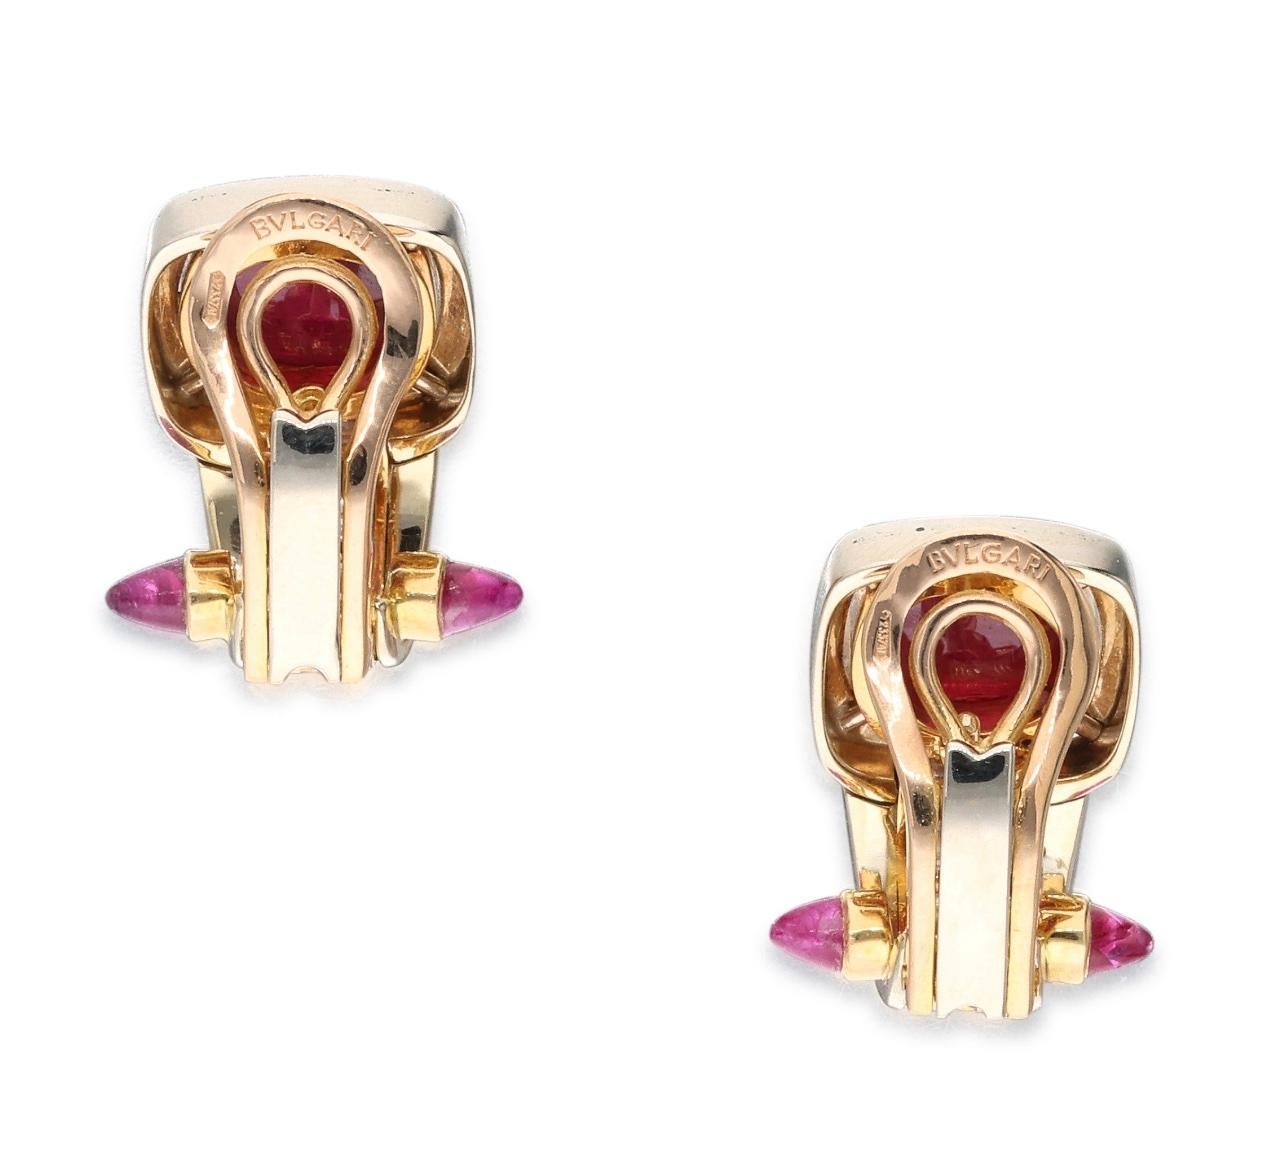 Bvlgari 18 karat yellow gold pair of ear clips. Each ear clip is set with cabochon rubies, bullet-shaped rubies, and baguette diamonds. The diamonds weigh a total of approximately 1 carat. Marked: Bvlgari. Made in Italy. Total weight: 14.47 grams.